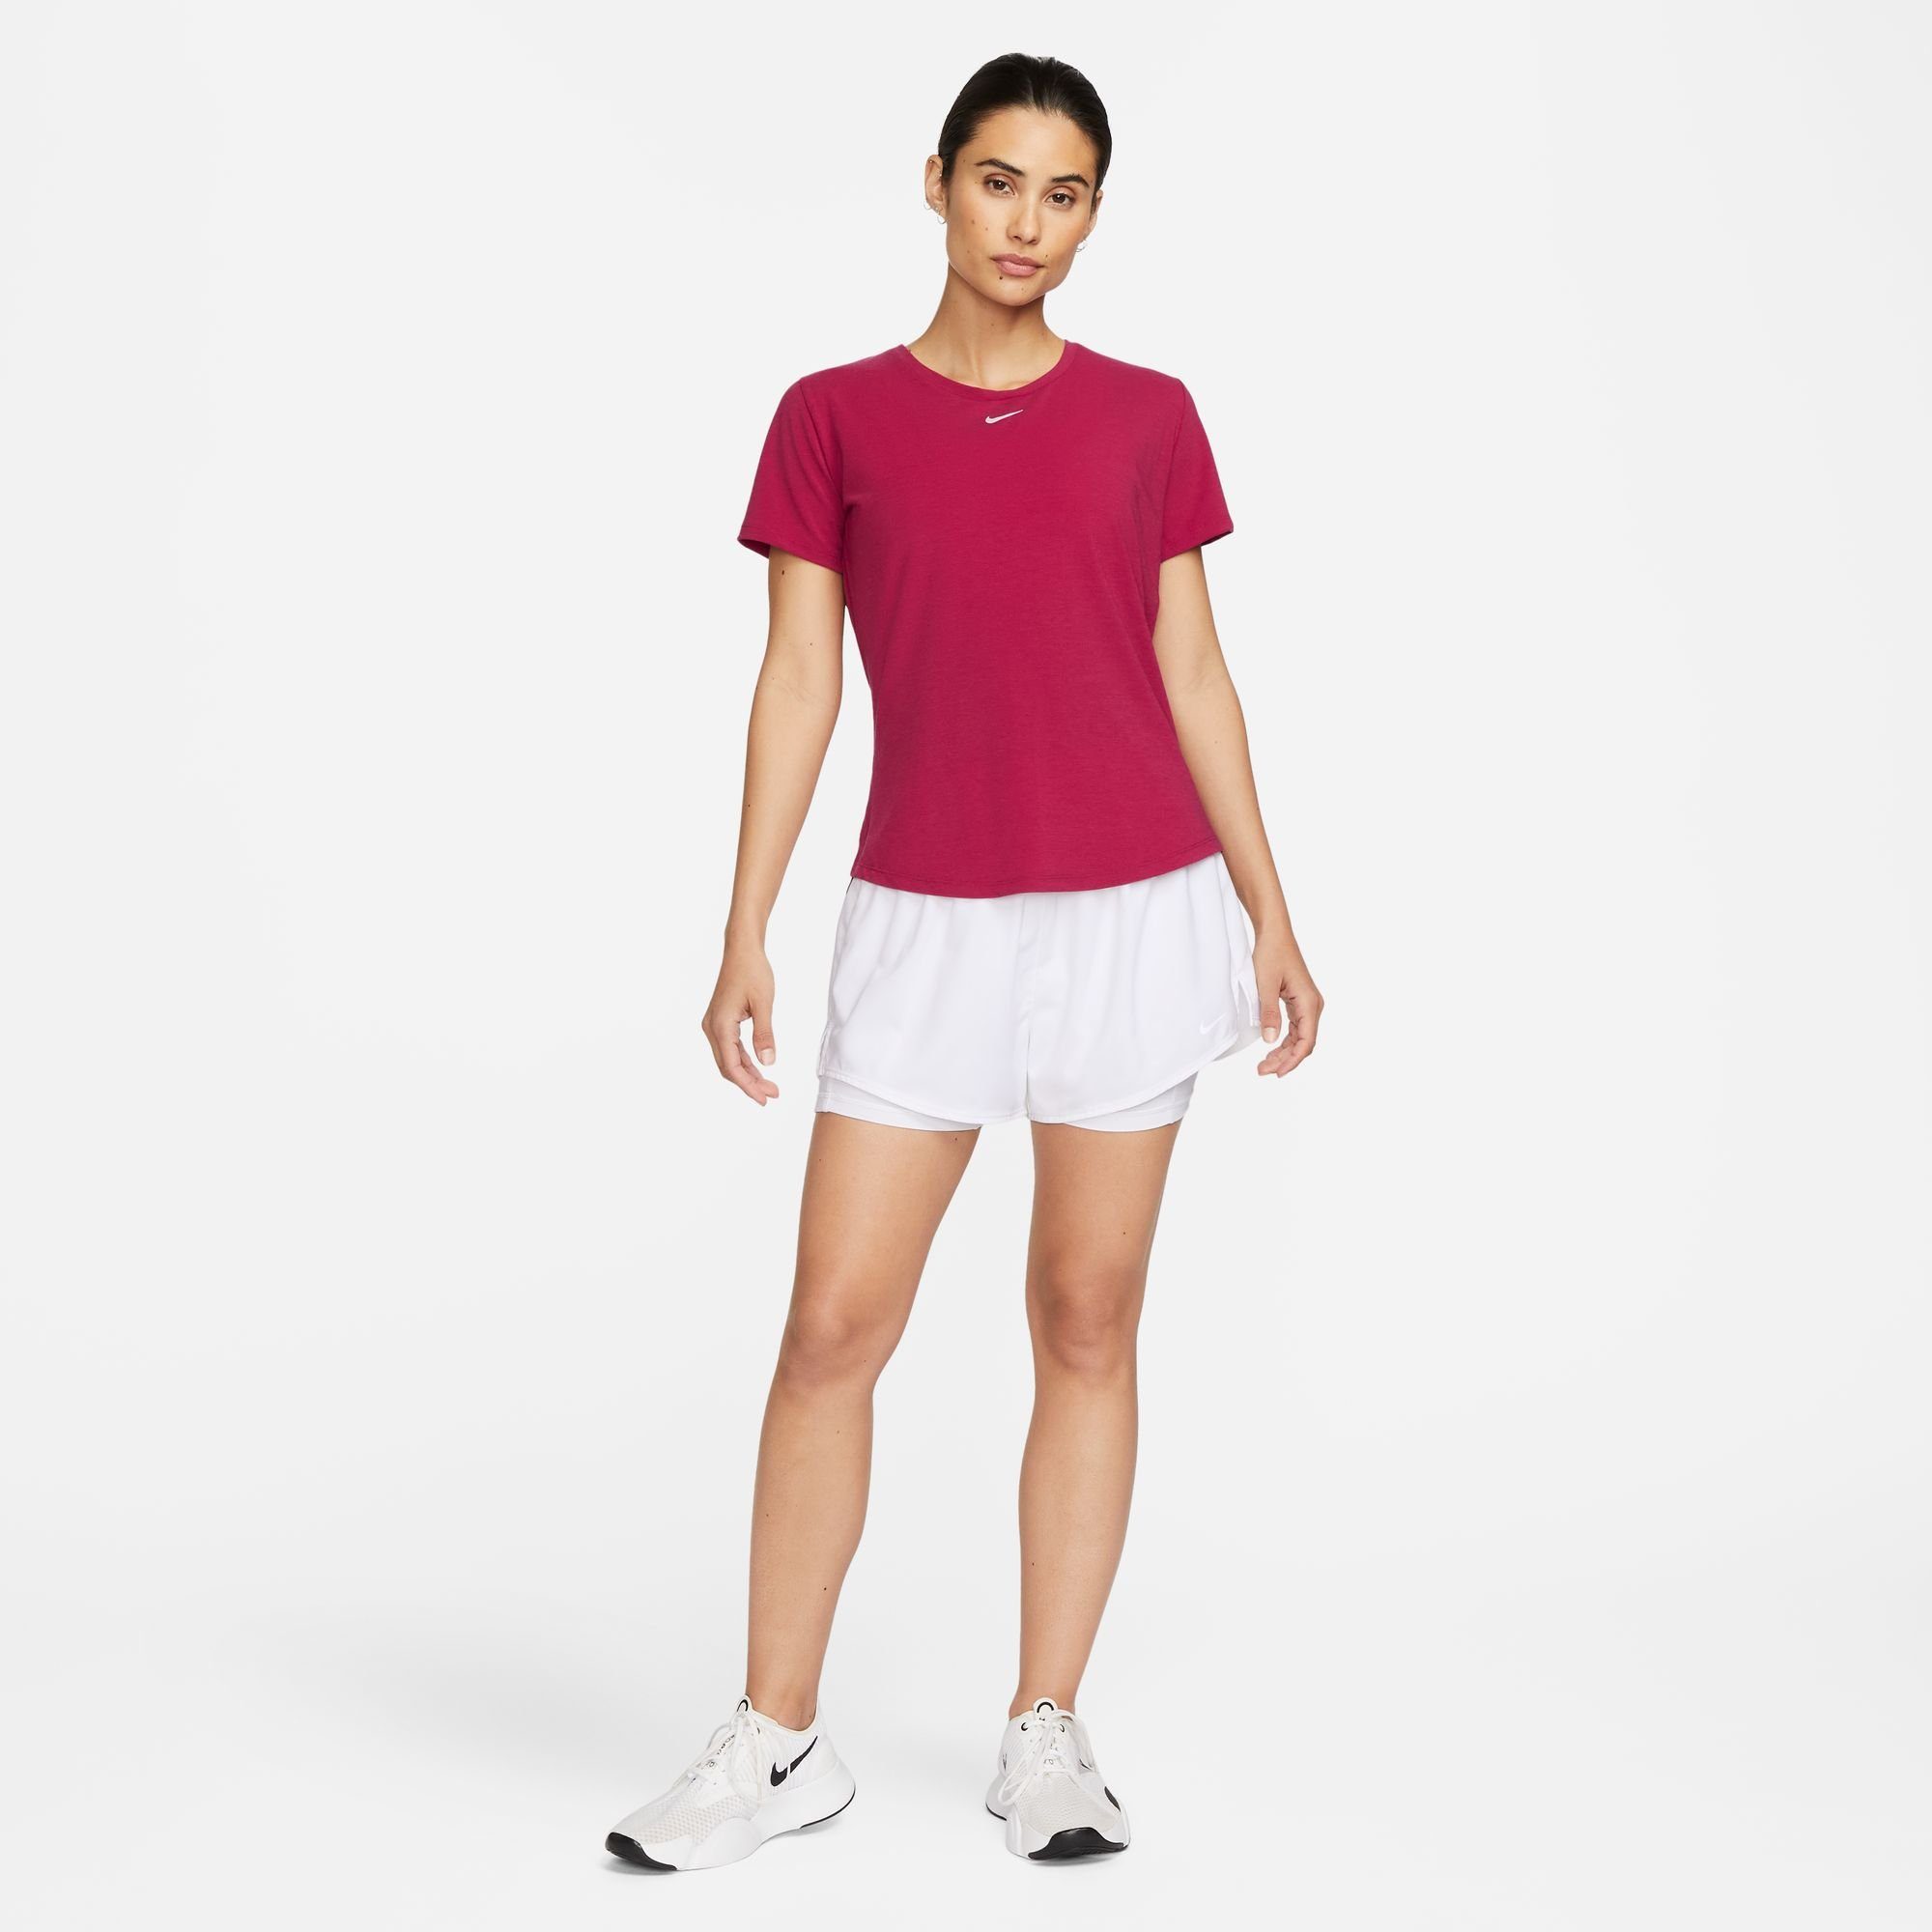 Nike Trainingsshirt DRI-FIT UV NOBLE WOMEN'S TOP ONE SHORT-SLEEVE LUXE RED/REFLECTIVE FIT SILV STANDARD